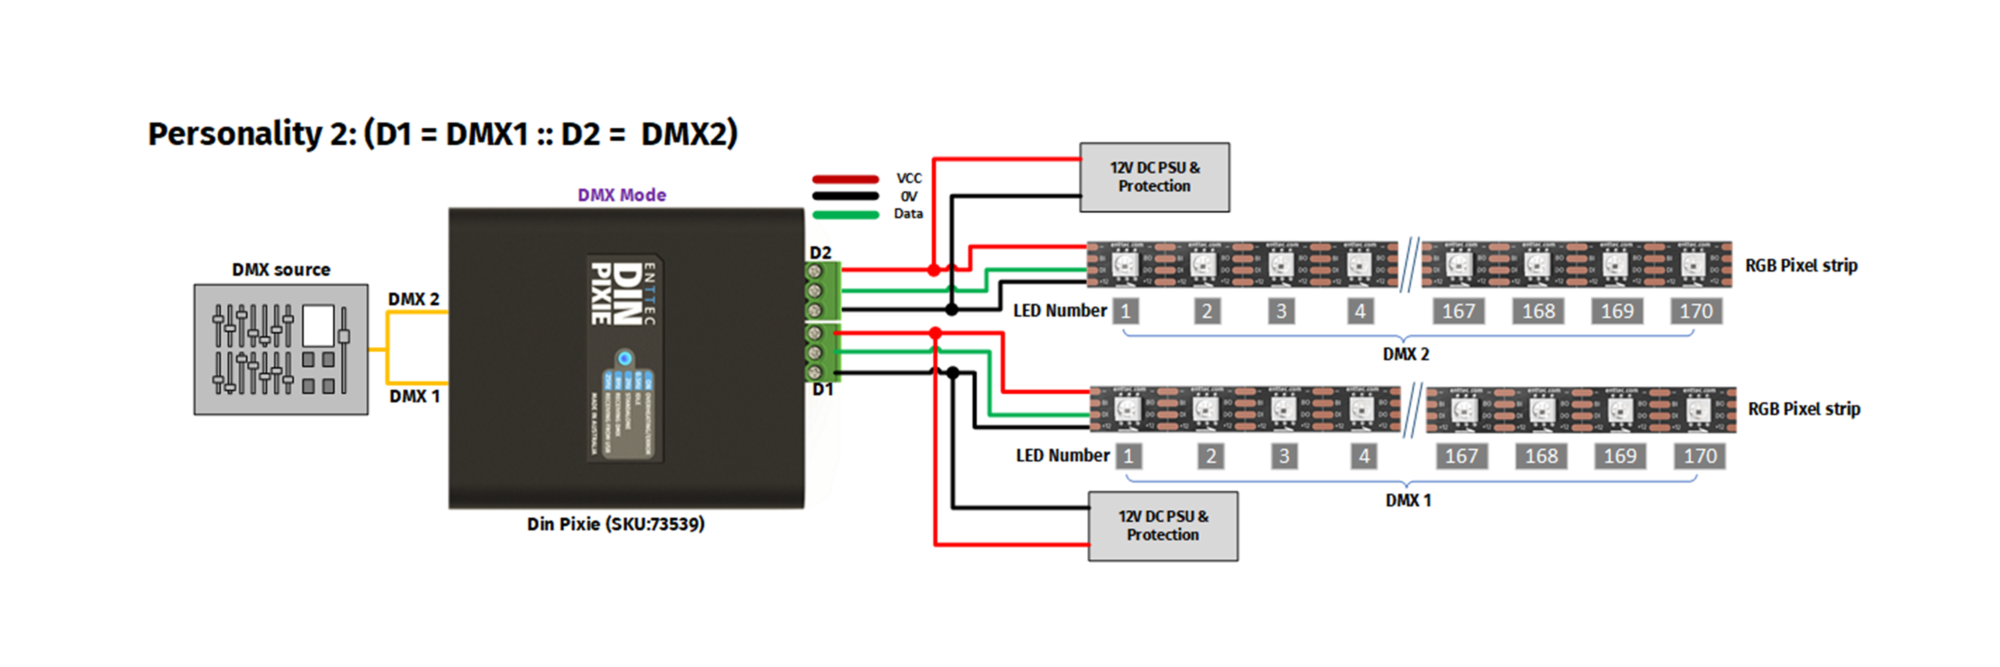 Wiring diagram of the DIN Pixie DMX to SPI Converter showing setup with LED Pixel tape and powersupplies attached to both SPI output ports.